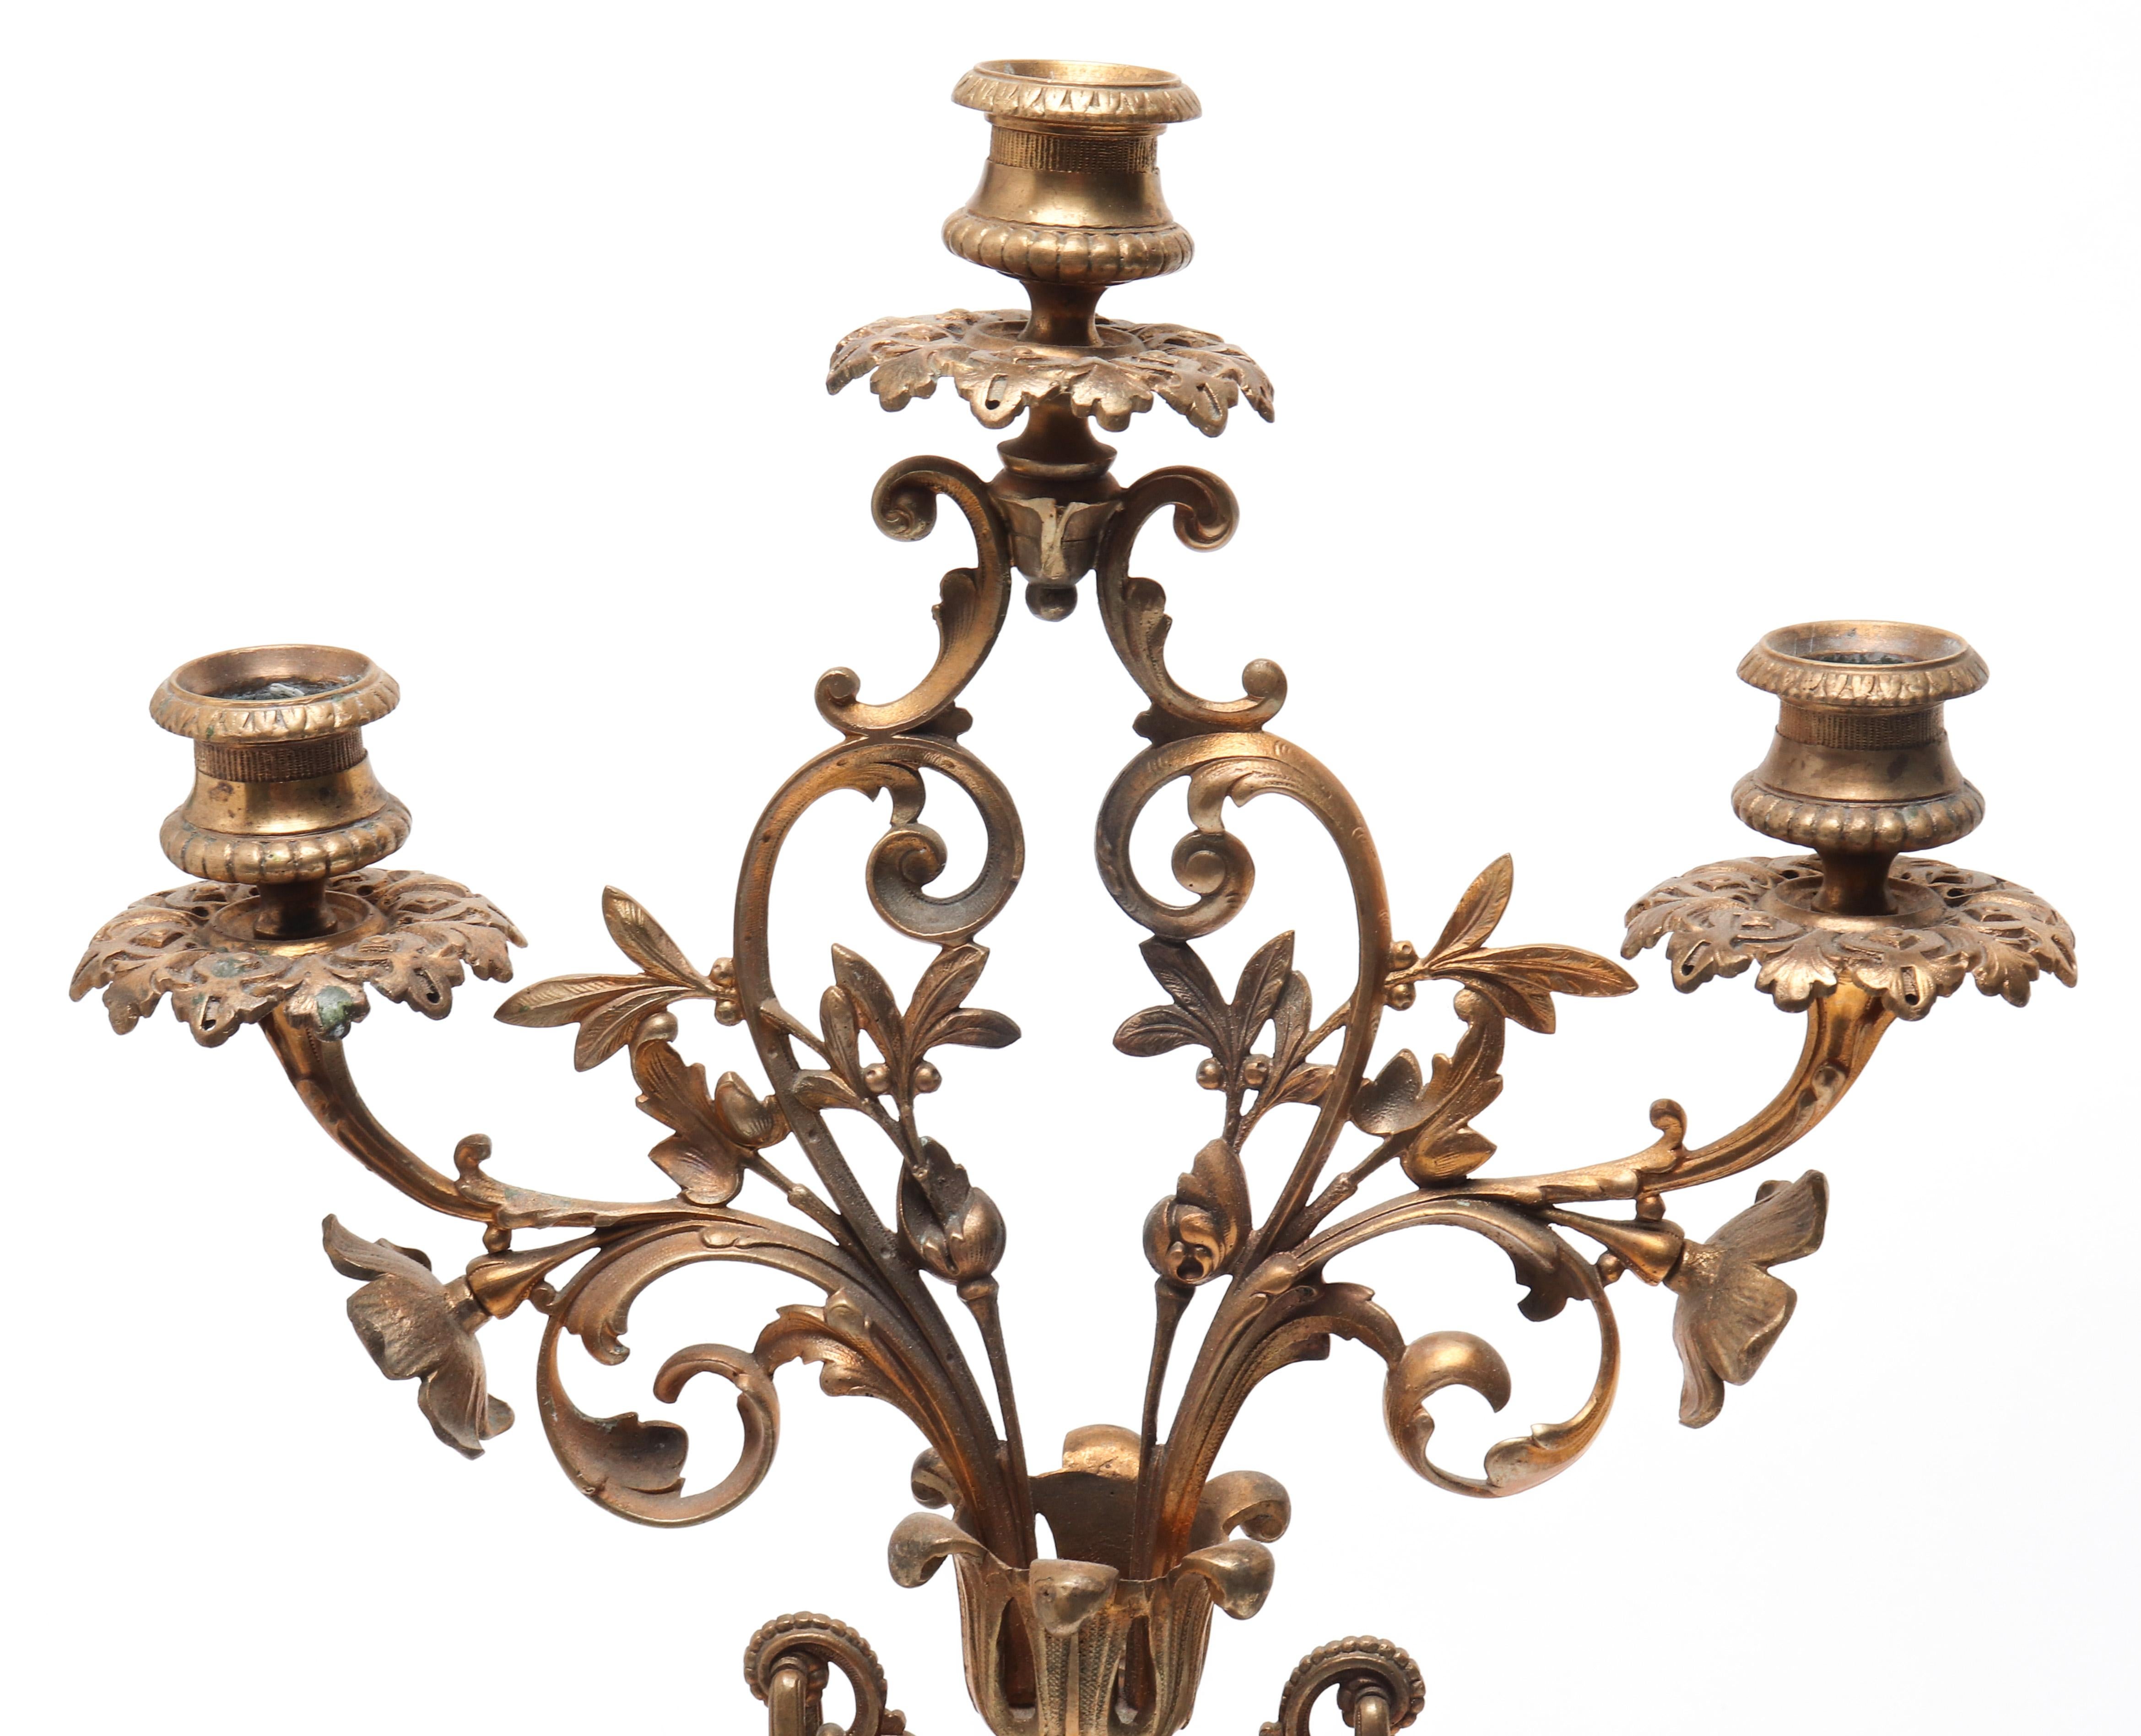 Continental pair of neoclassical style three arm candelabras with an ormolu mounted urn-form deep oxblood enamel body. The pair is topped with a bronze bouquet forming candle branches, and has three bronze feet supporting an enamel base. In great